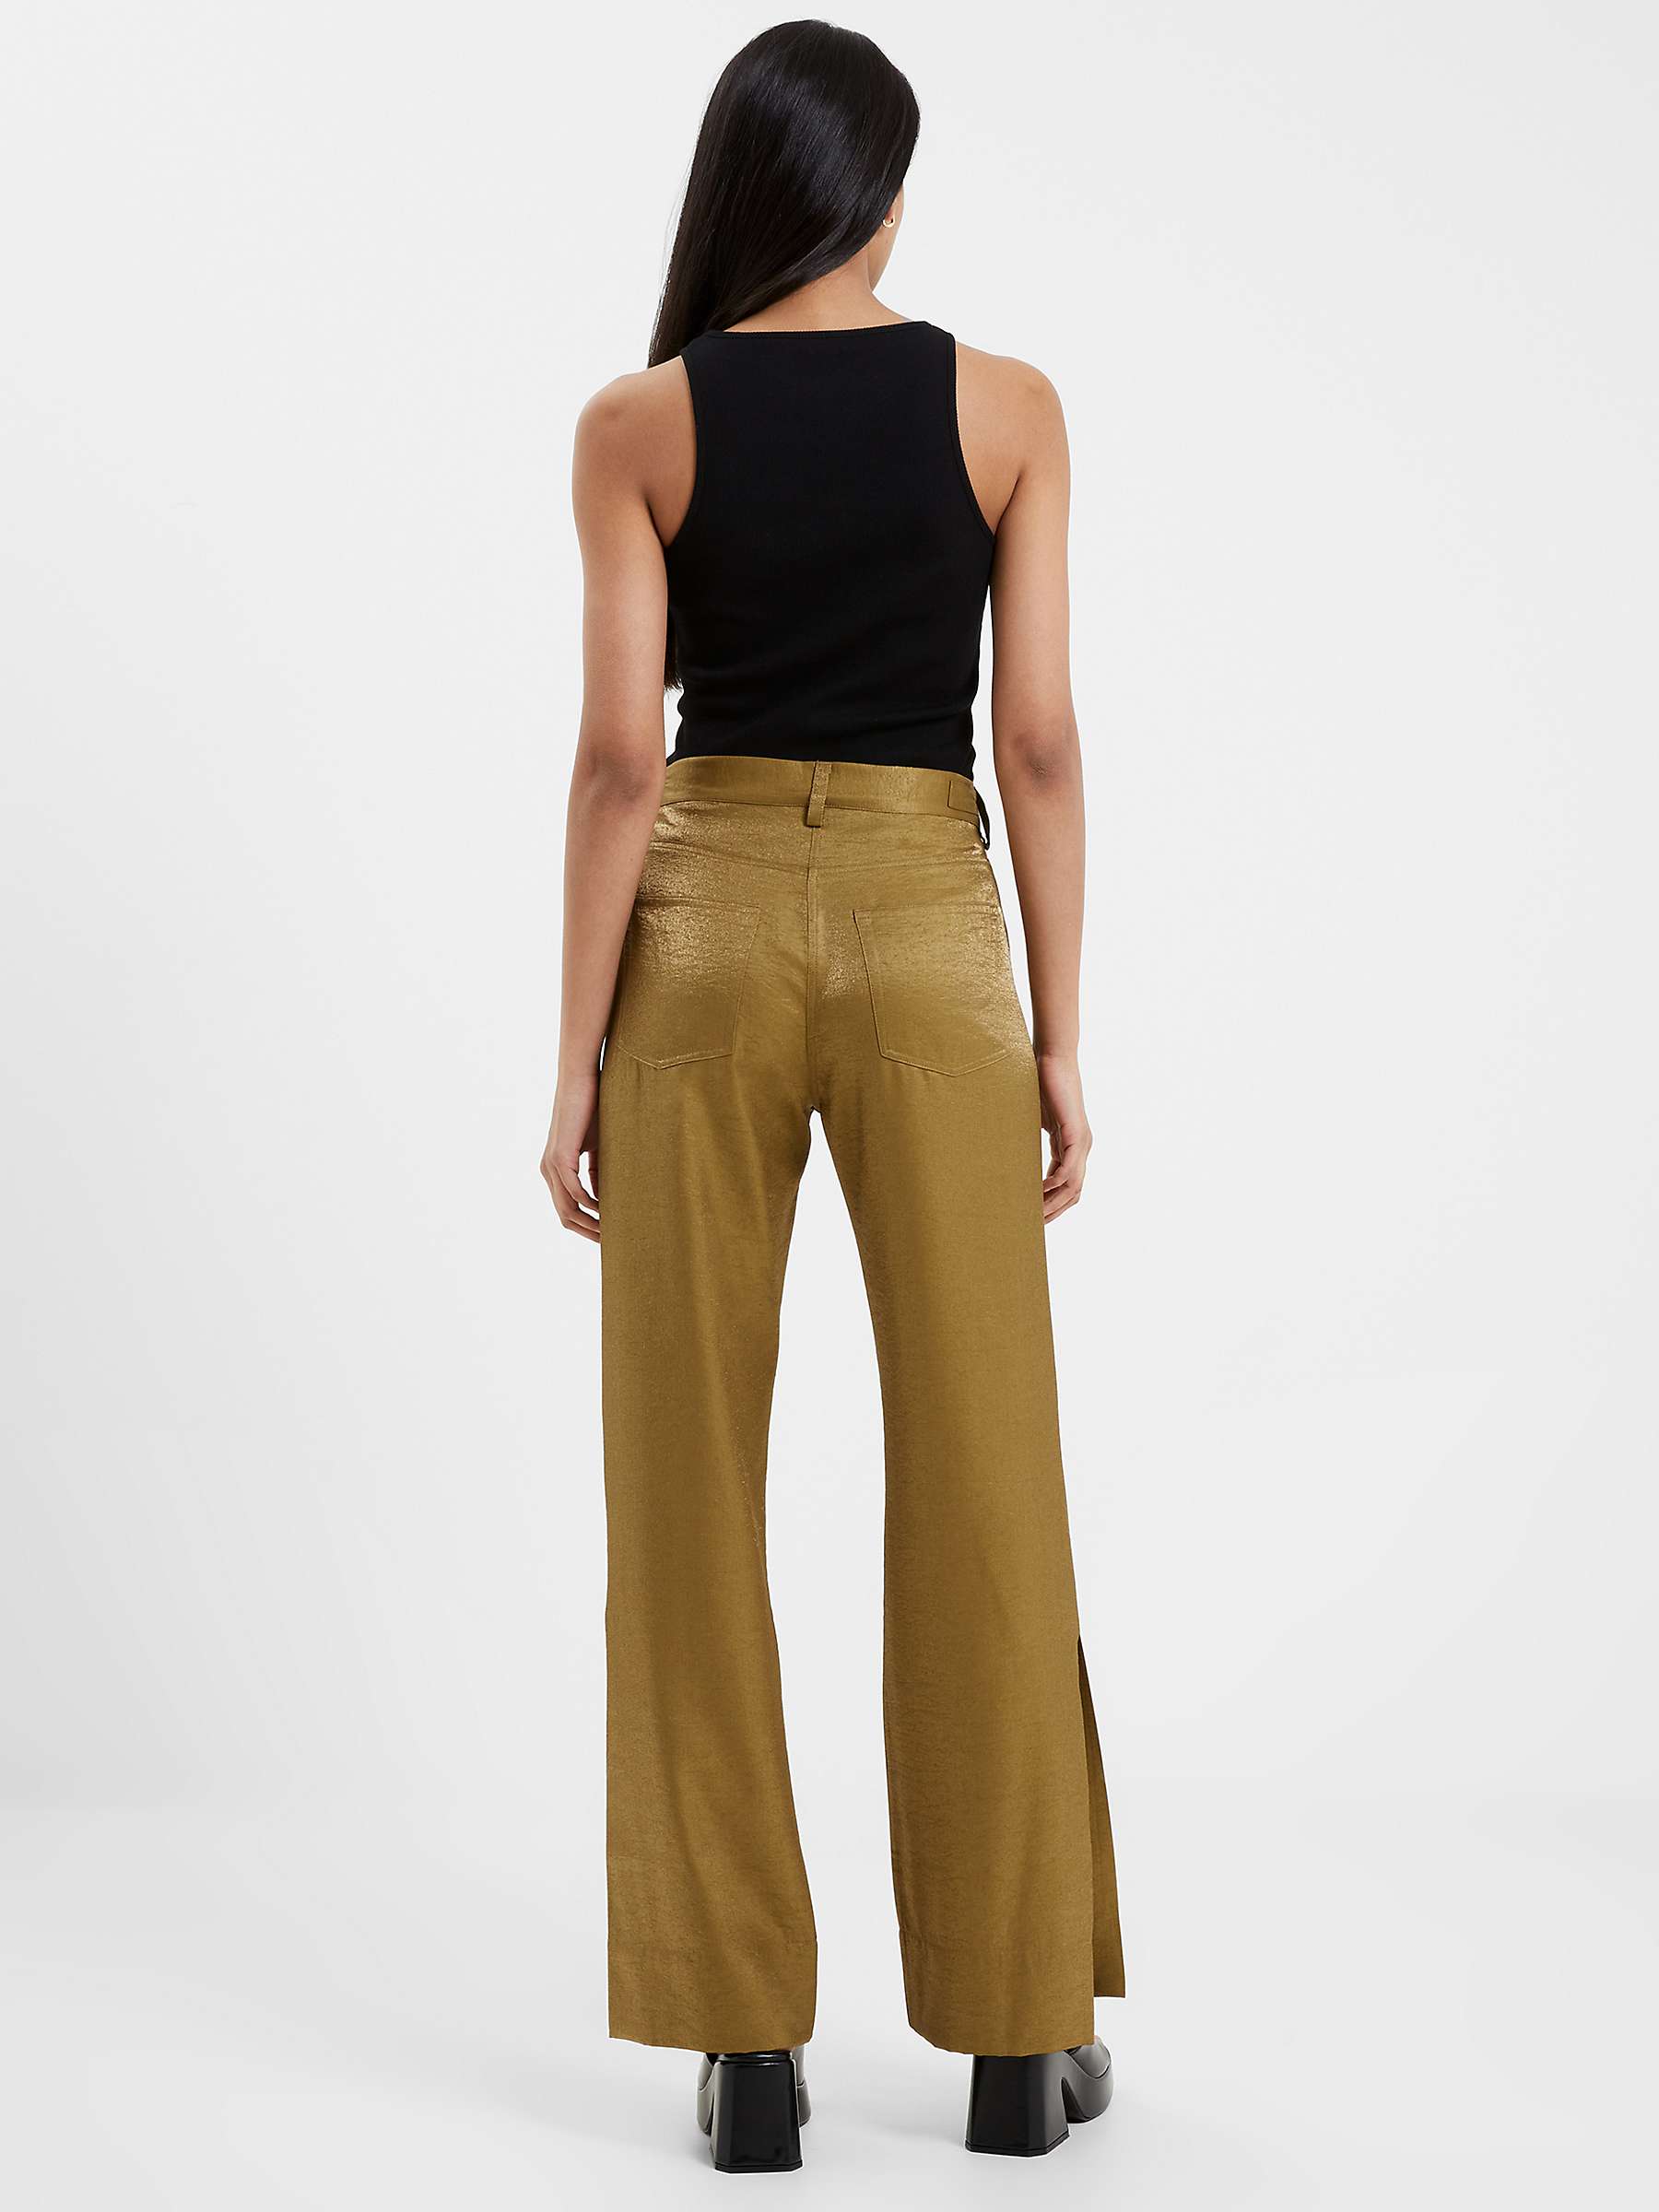 Buy French Connection Cammie Shimmer Trousers, Khaki Online at johnlewis.com